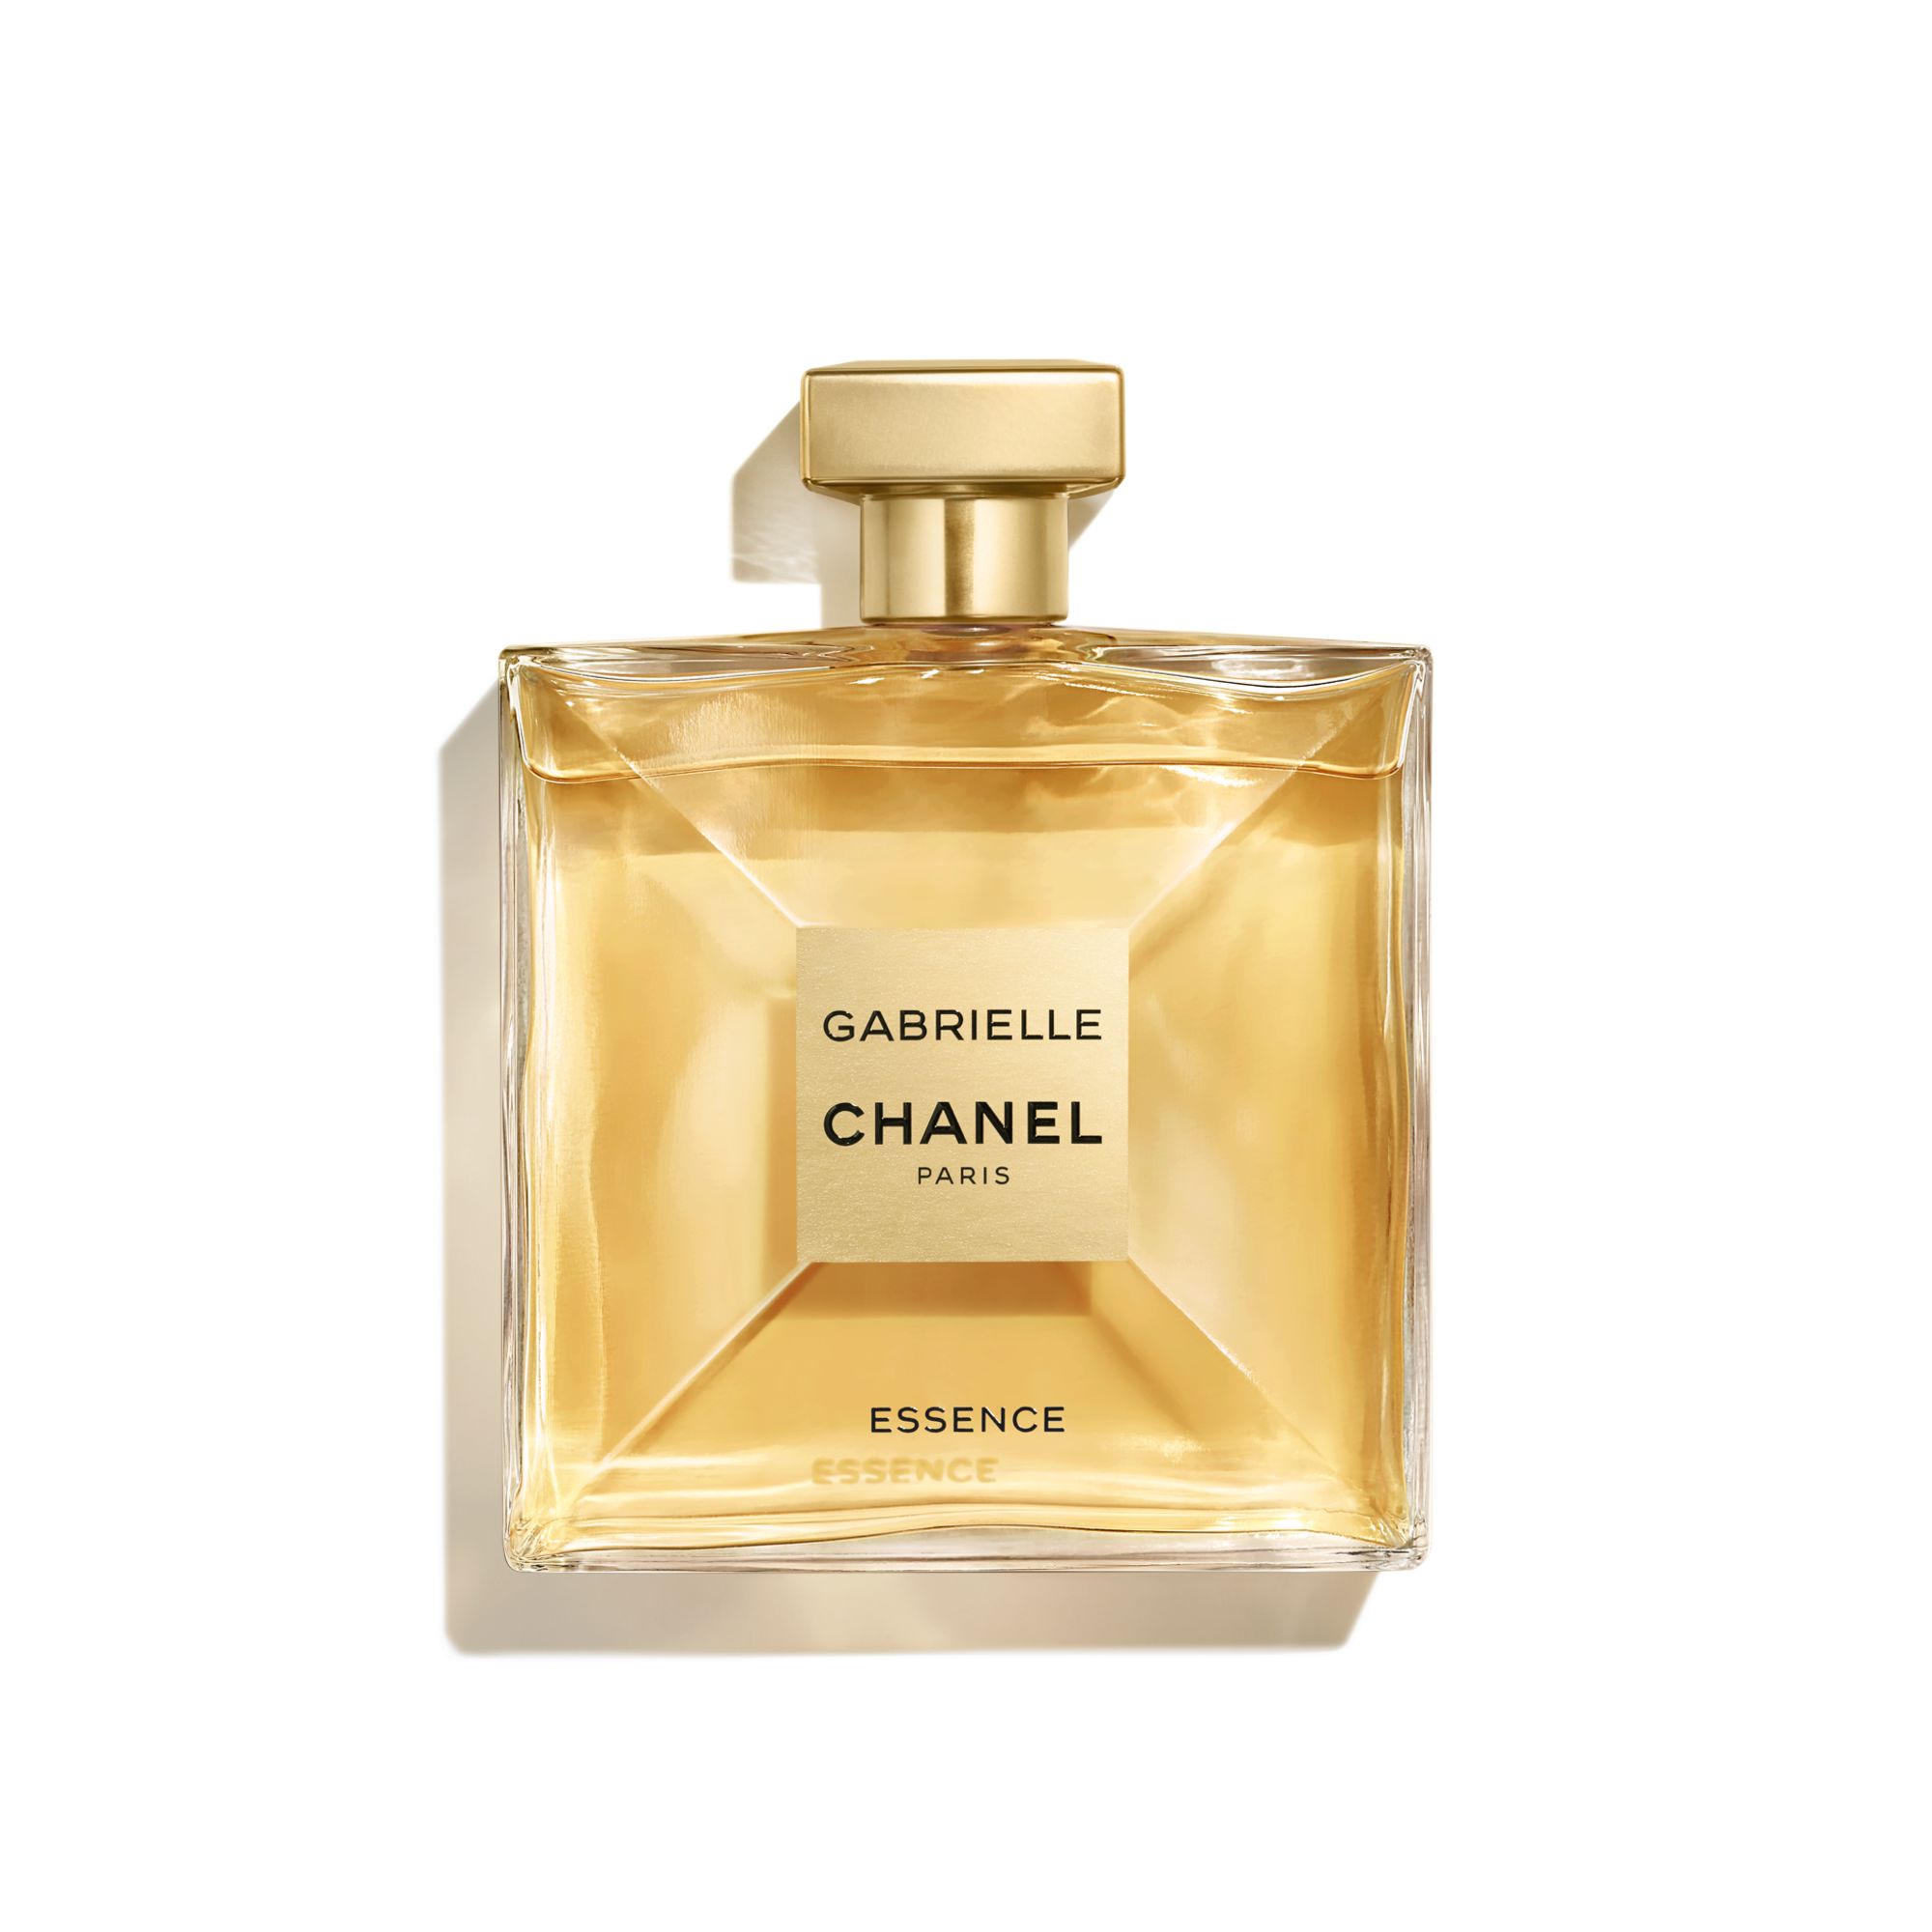 CHANEL Shop Holiday Deals on Perfume for Women